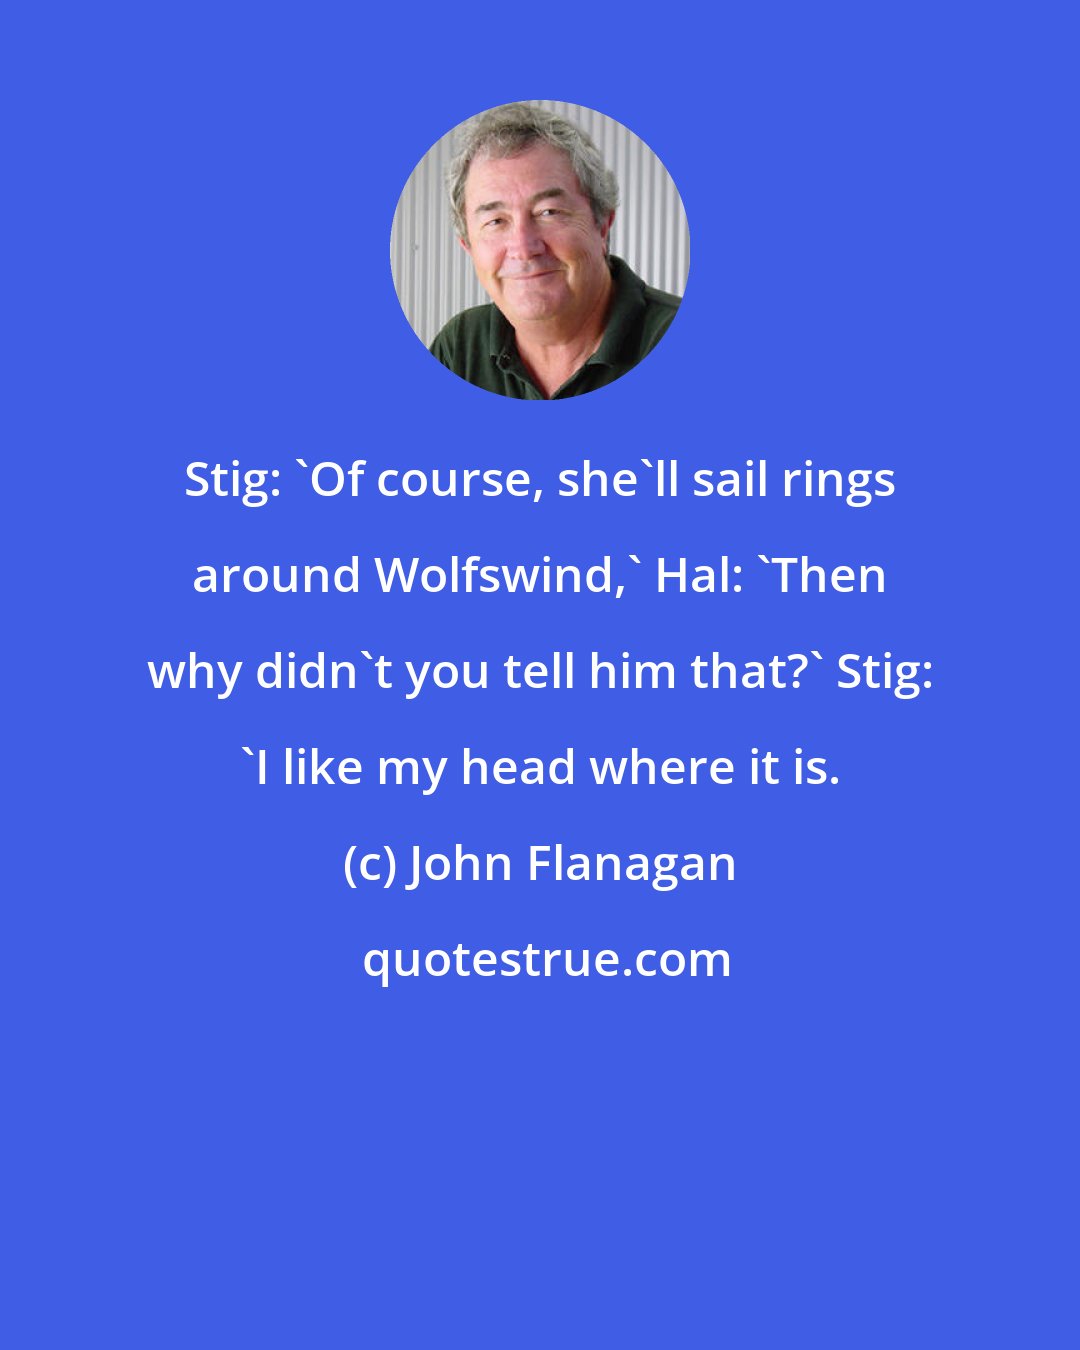 John Flanagan: Stig: 'Of course, she'll sail rings around Wolfswind,' Hal: 'Then why didn't you tell him that?' Stig: 'I like my head where it is.